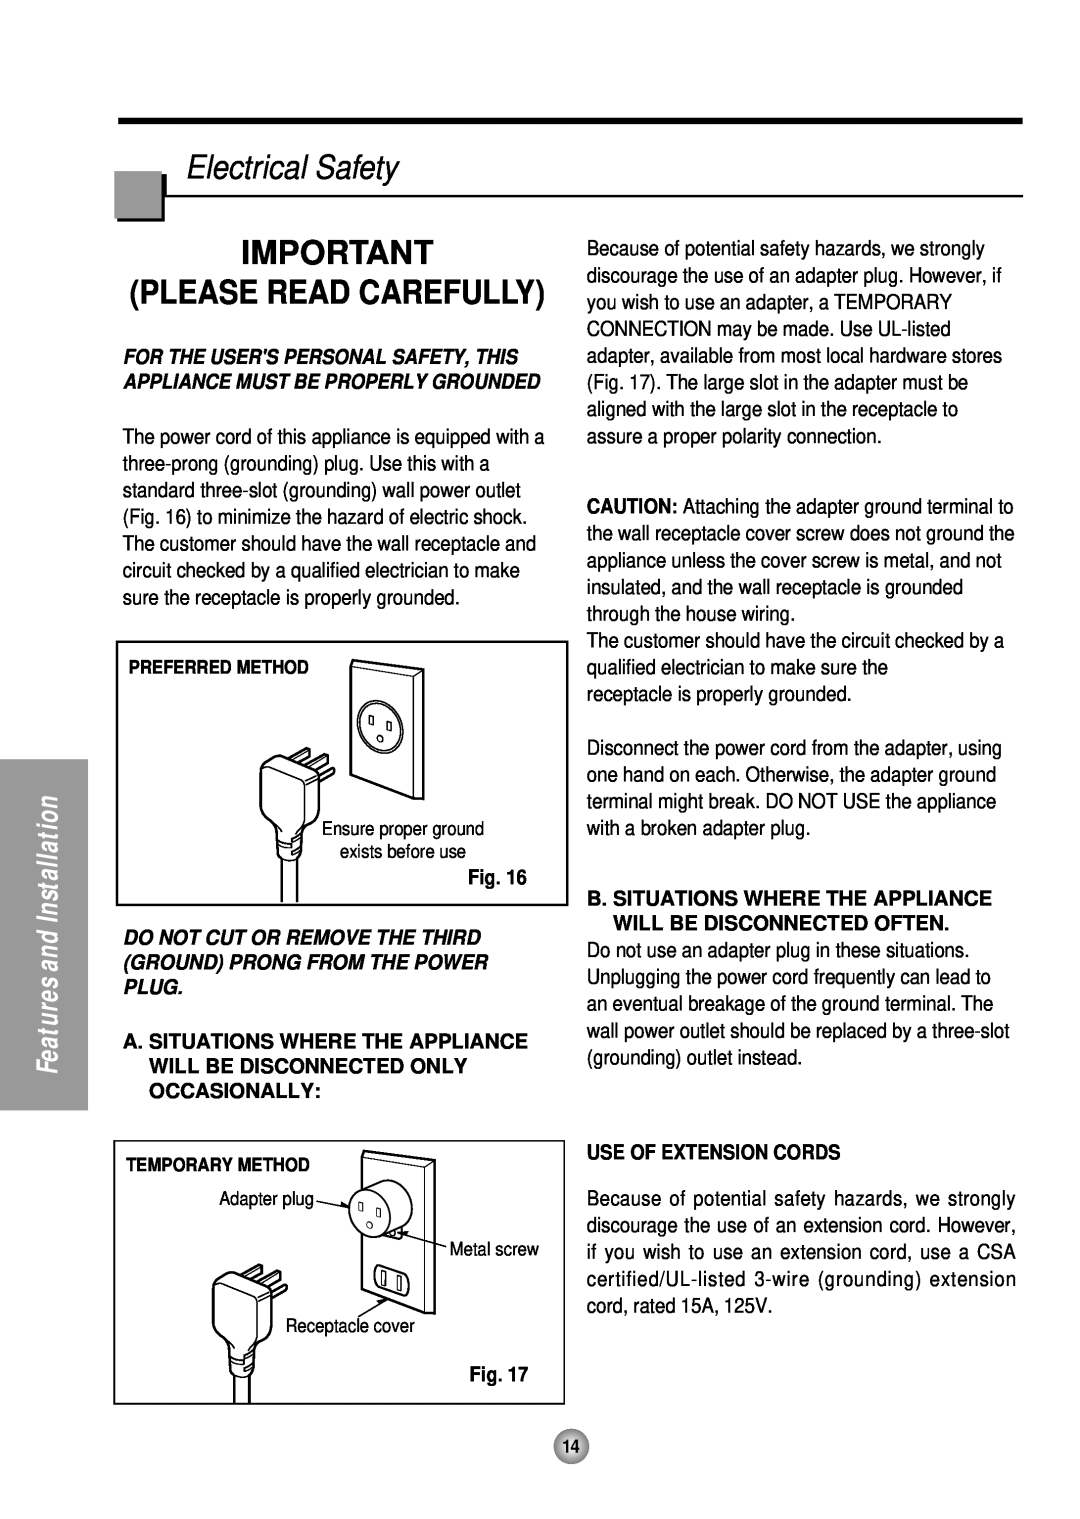 Quasar HQ-2081TH manual Electrical Safety, Please Read Carefully, Use Of Extension Cords, Features and Installation 